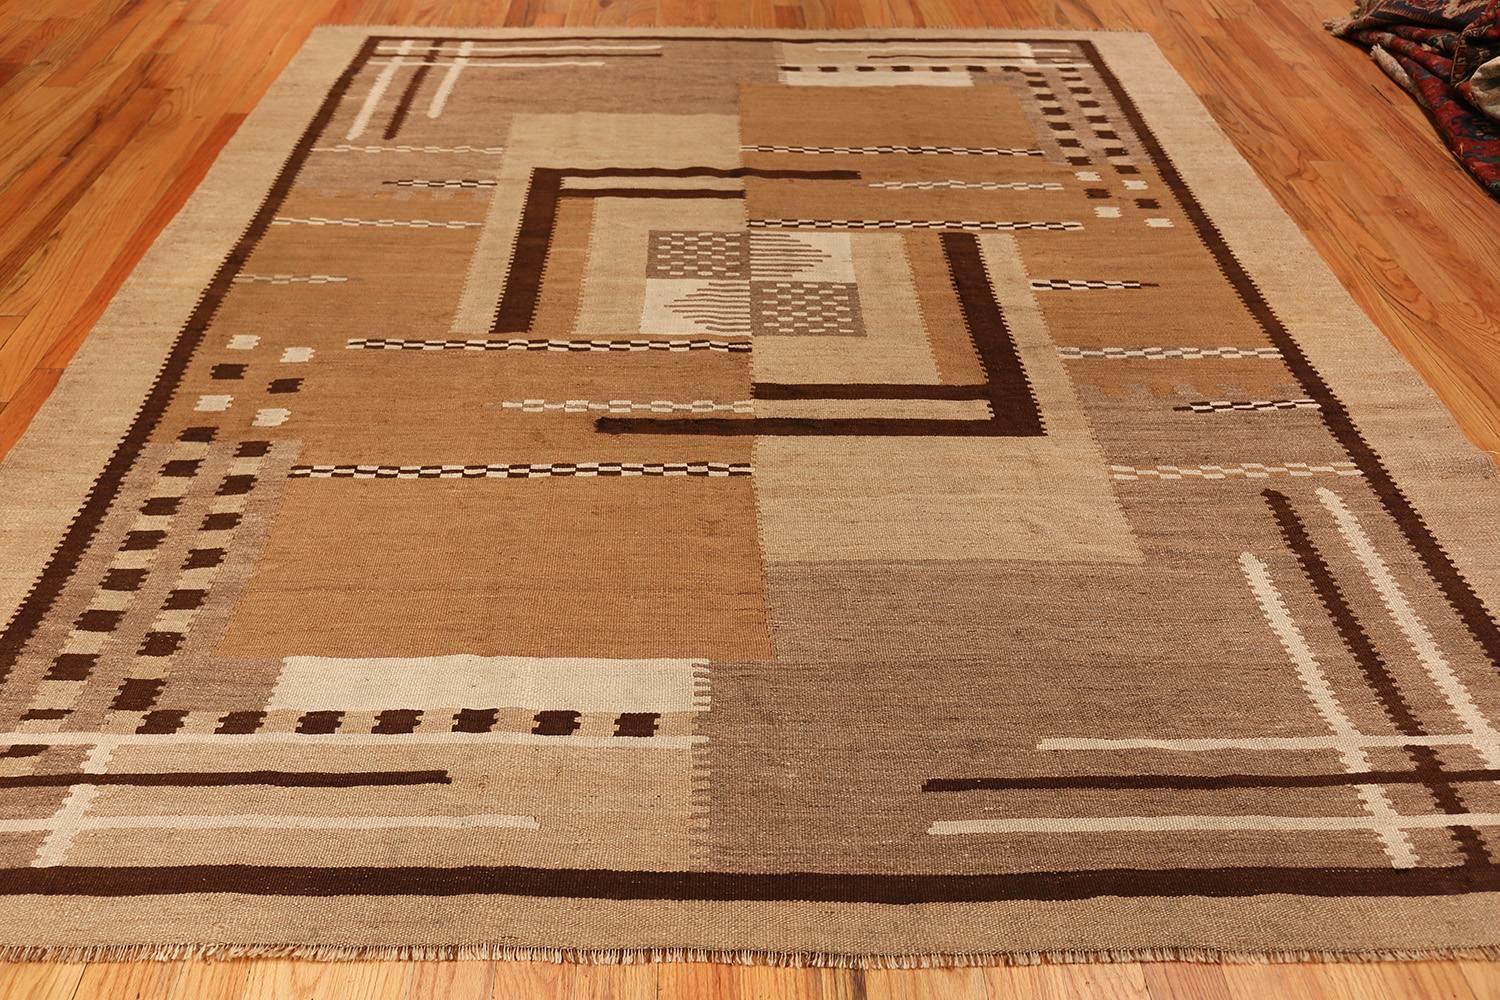 Antique French Art Deco Kilim Rug. 7 ft 6 in x 8 ft 10 in In Excellent Condition For Sale In New York, NY